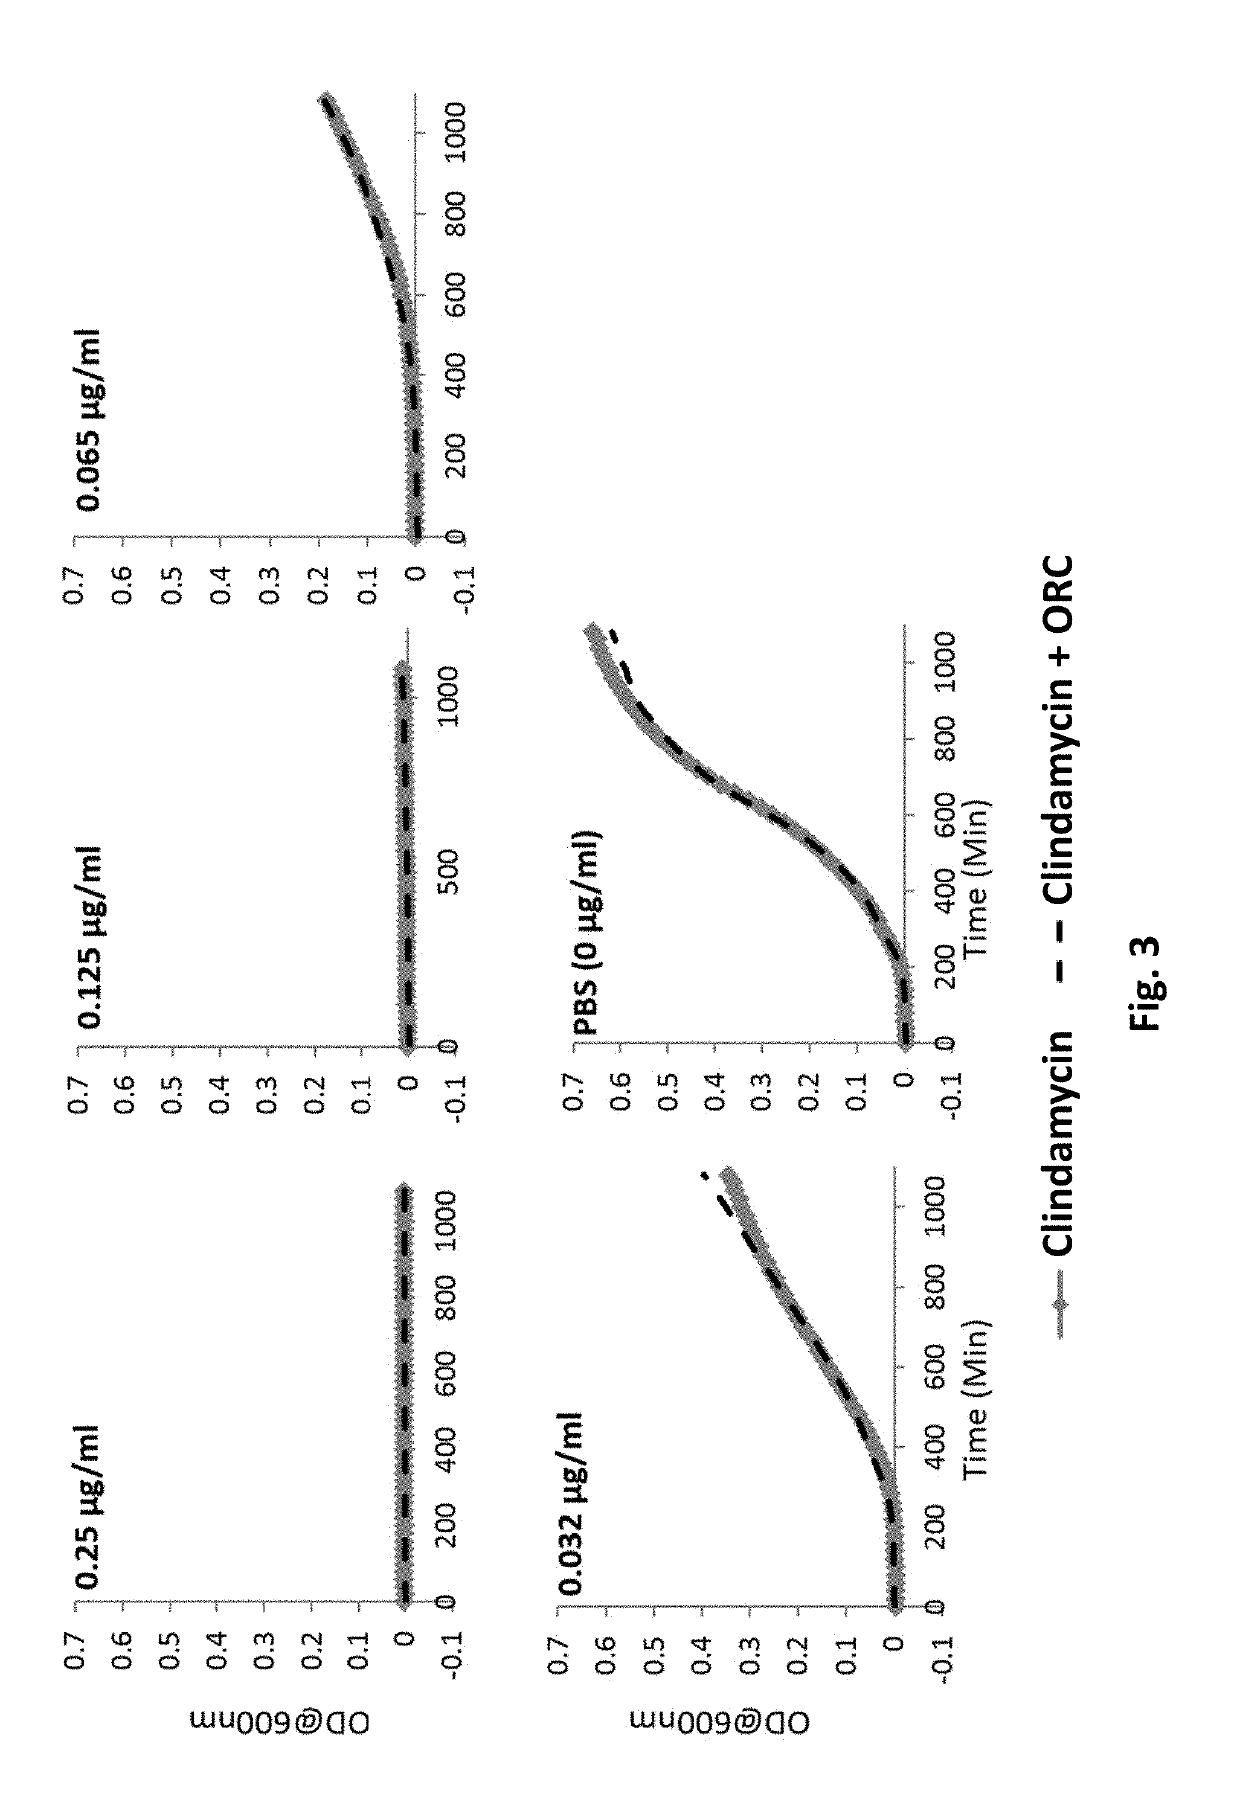 Antimicrobial compositions comprising minocycline and oxidized cellulose